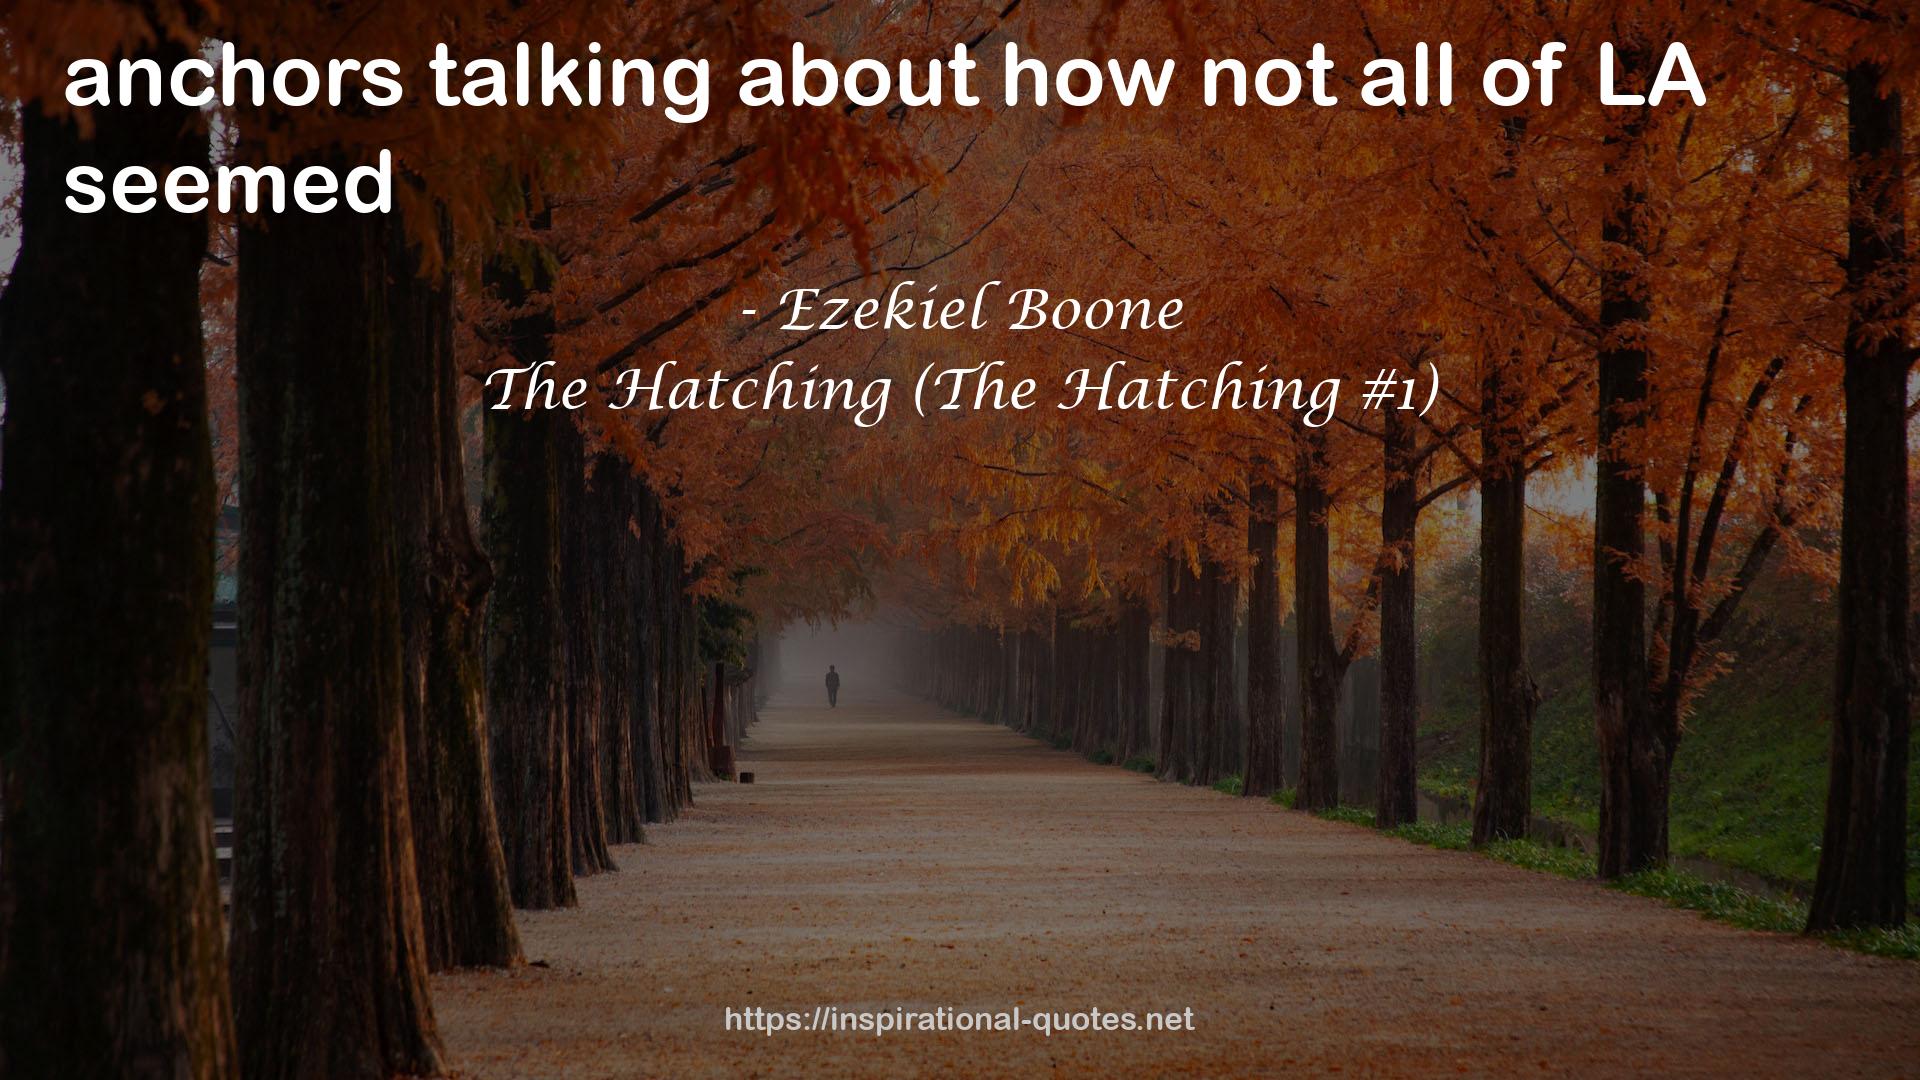 The Hatching (The Hatching #1) QUOTES